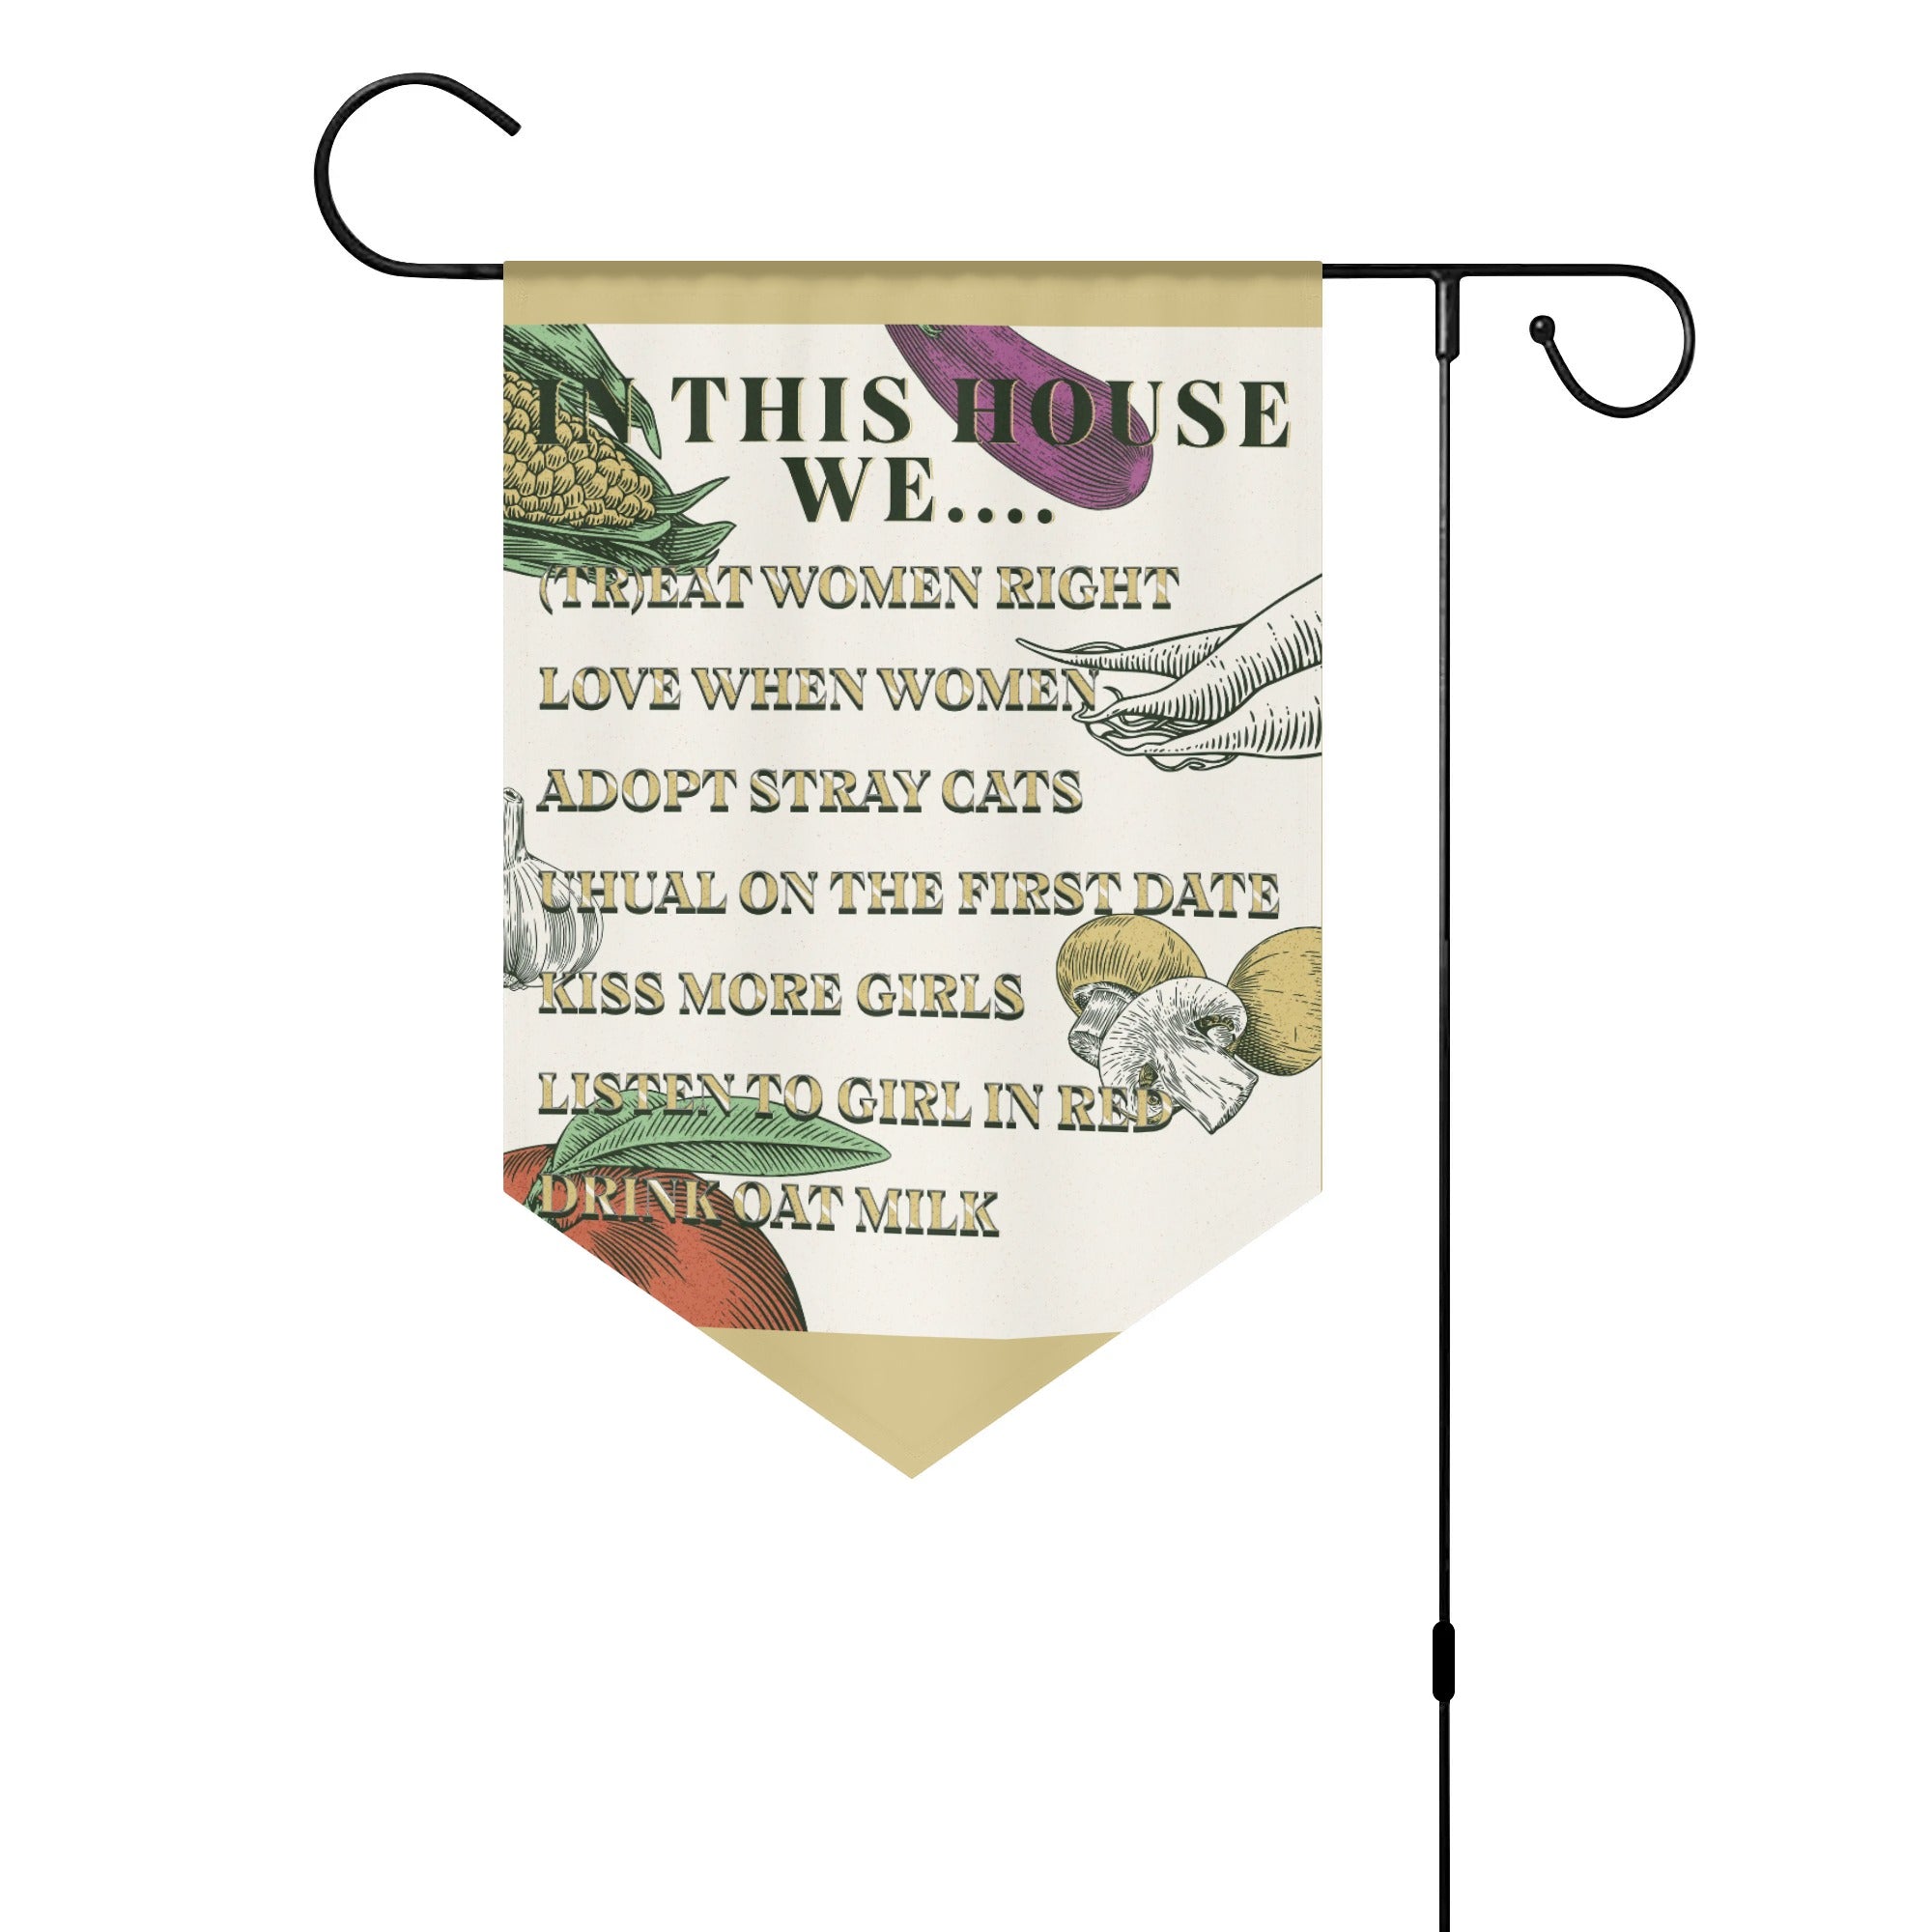 In this house we Lesbian Farm House Edition Garden Flag Banner (Inverted-triangle) 12X18 In